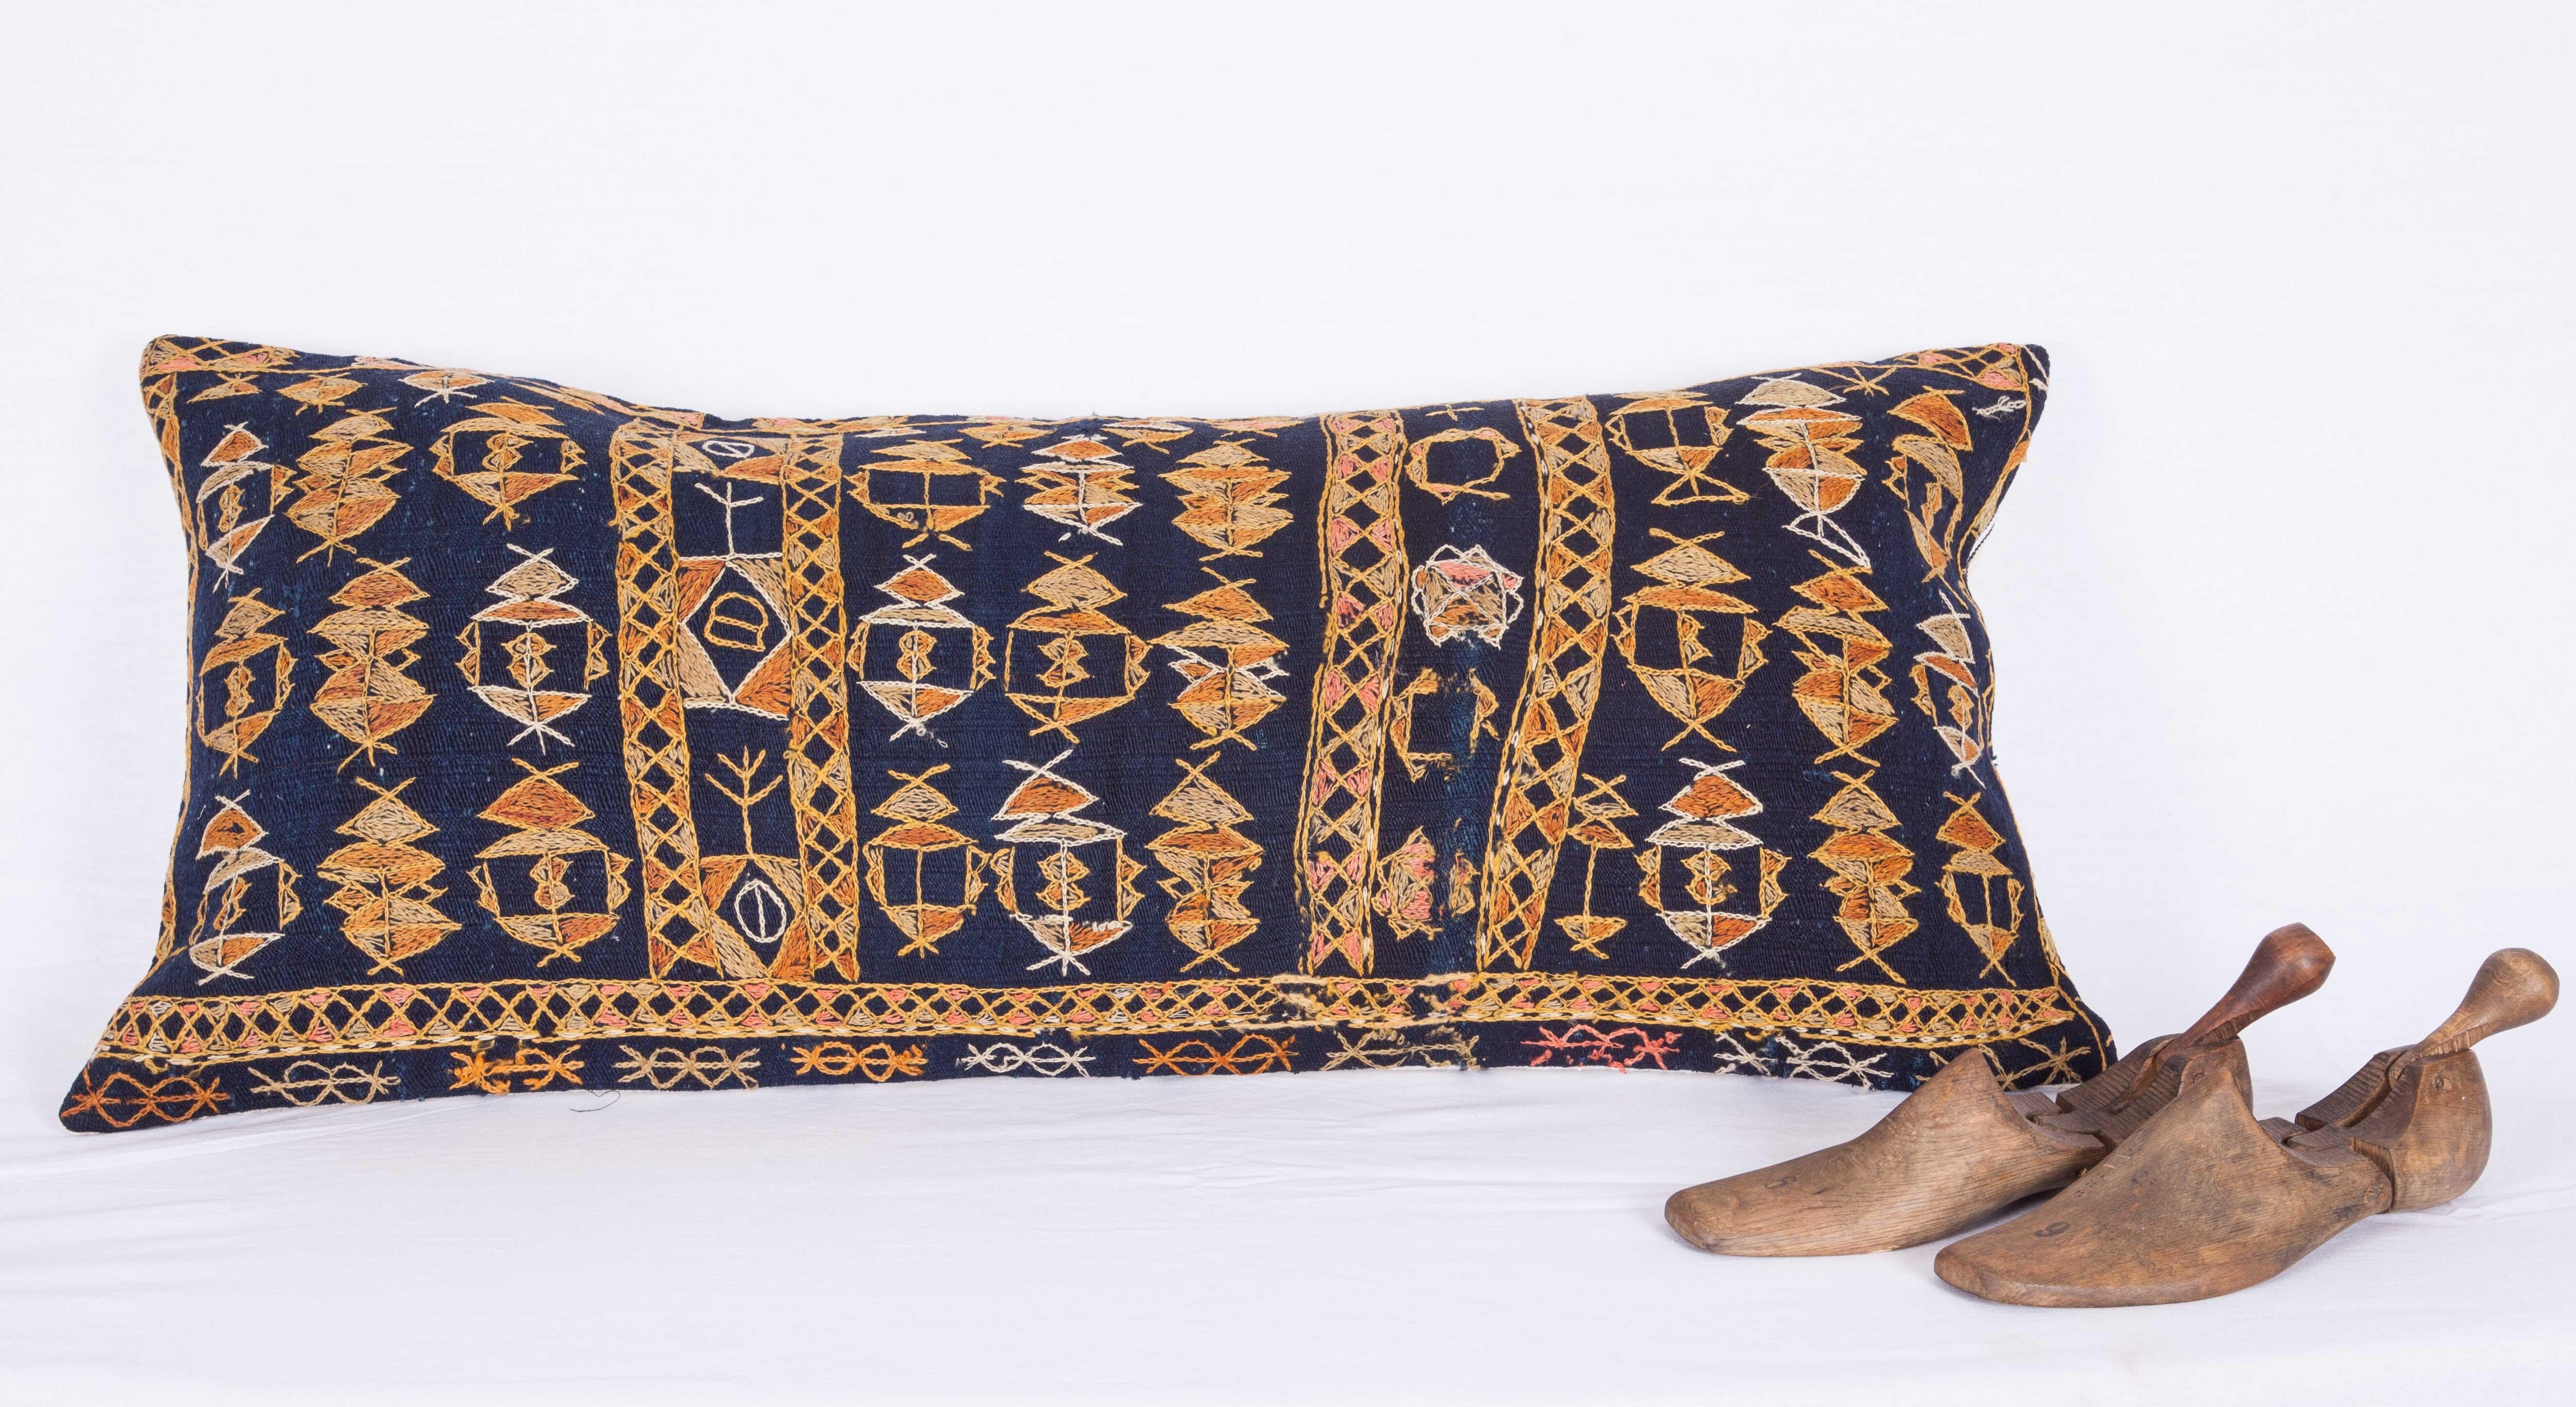 Embroidered Pillow Case Fashioned from an Early 20th Century Kurdish Djidjim